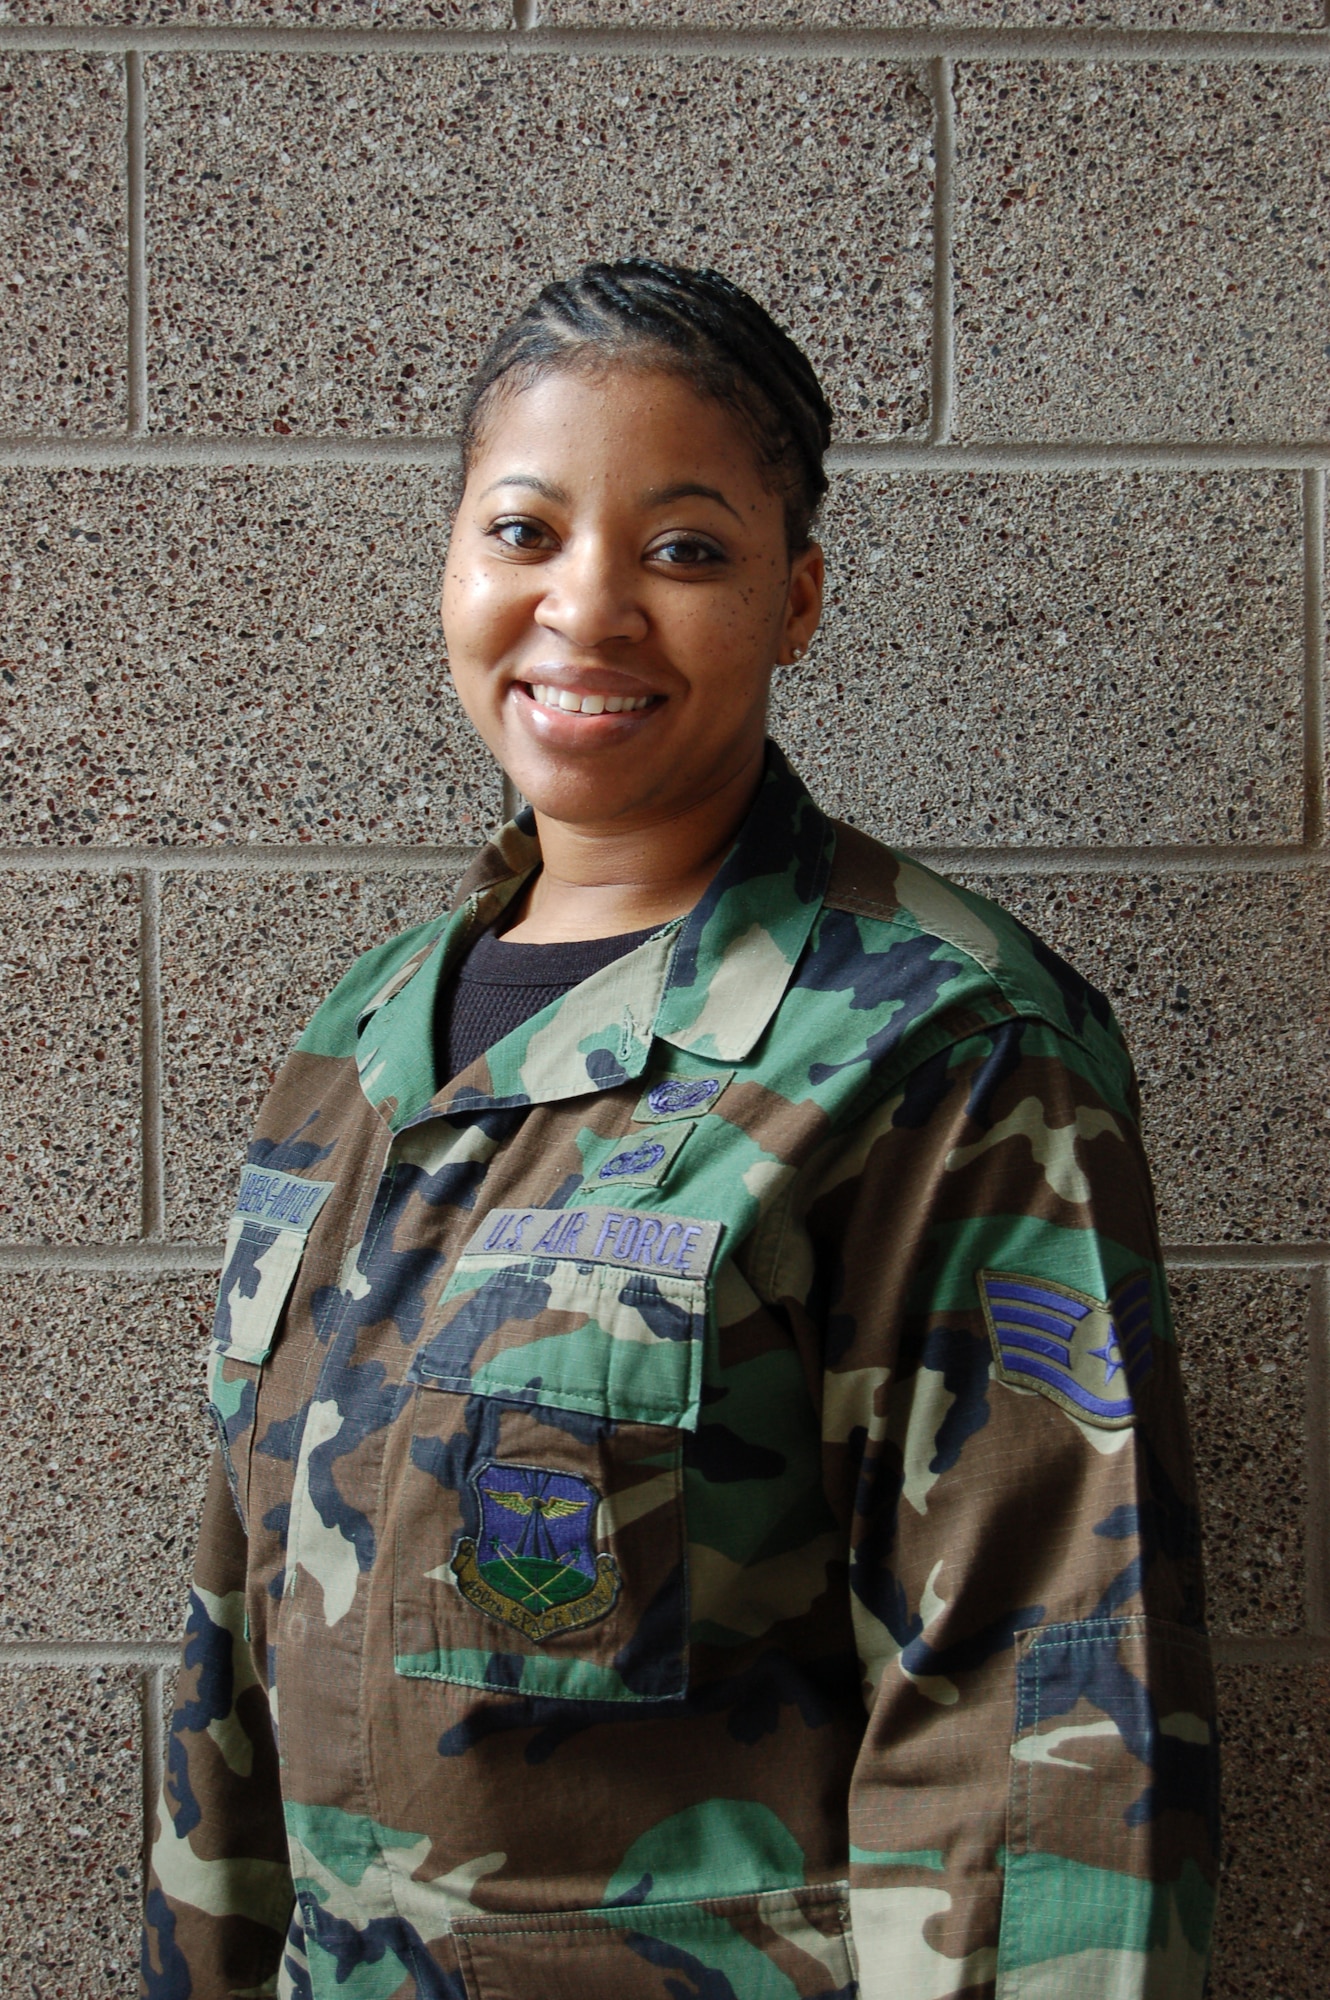 Staff Sgt. Pourshia Chambers-Motley, who hails from Tucson, Ariz., is Buckley's Star Performer for the week of Oct. 27 through Nov. 2. Sergeant Chambers-Motley works in the 460th Mission Support Squadron. (U.S. Air Force photo by Senior Airman Jacque Lickteig)